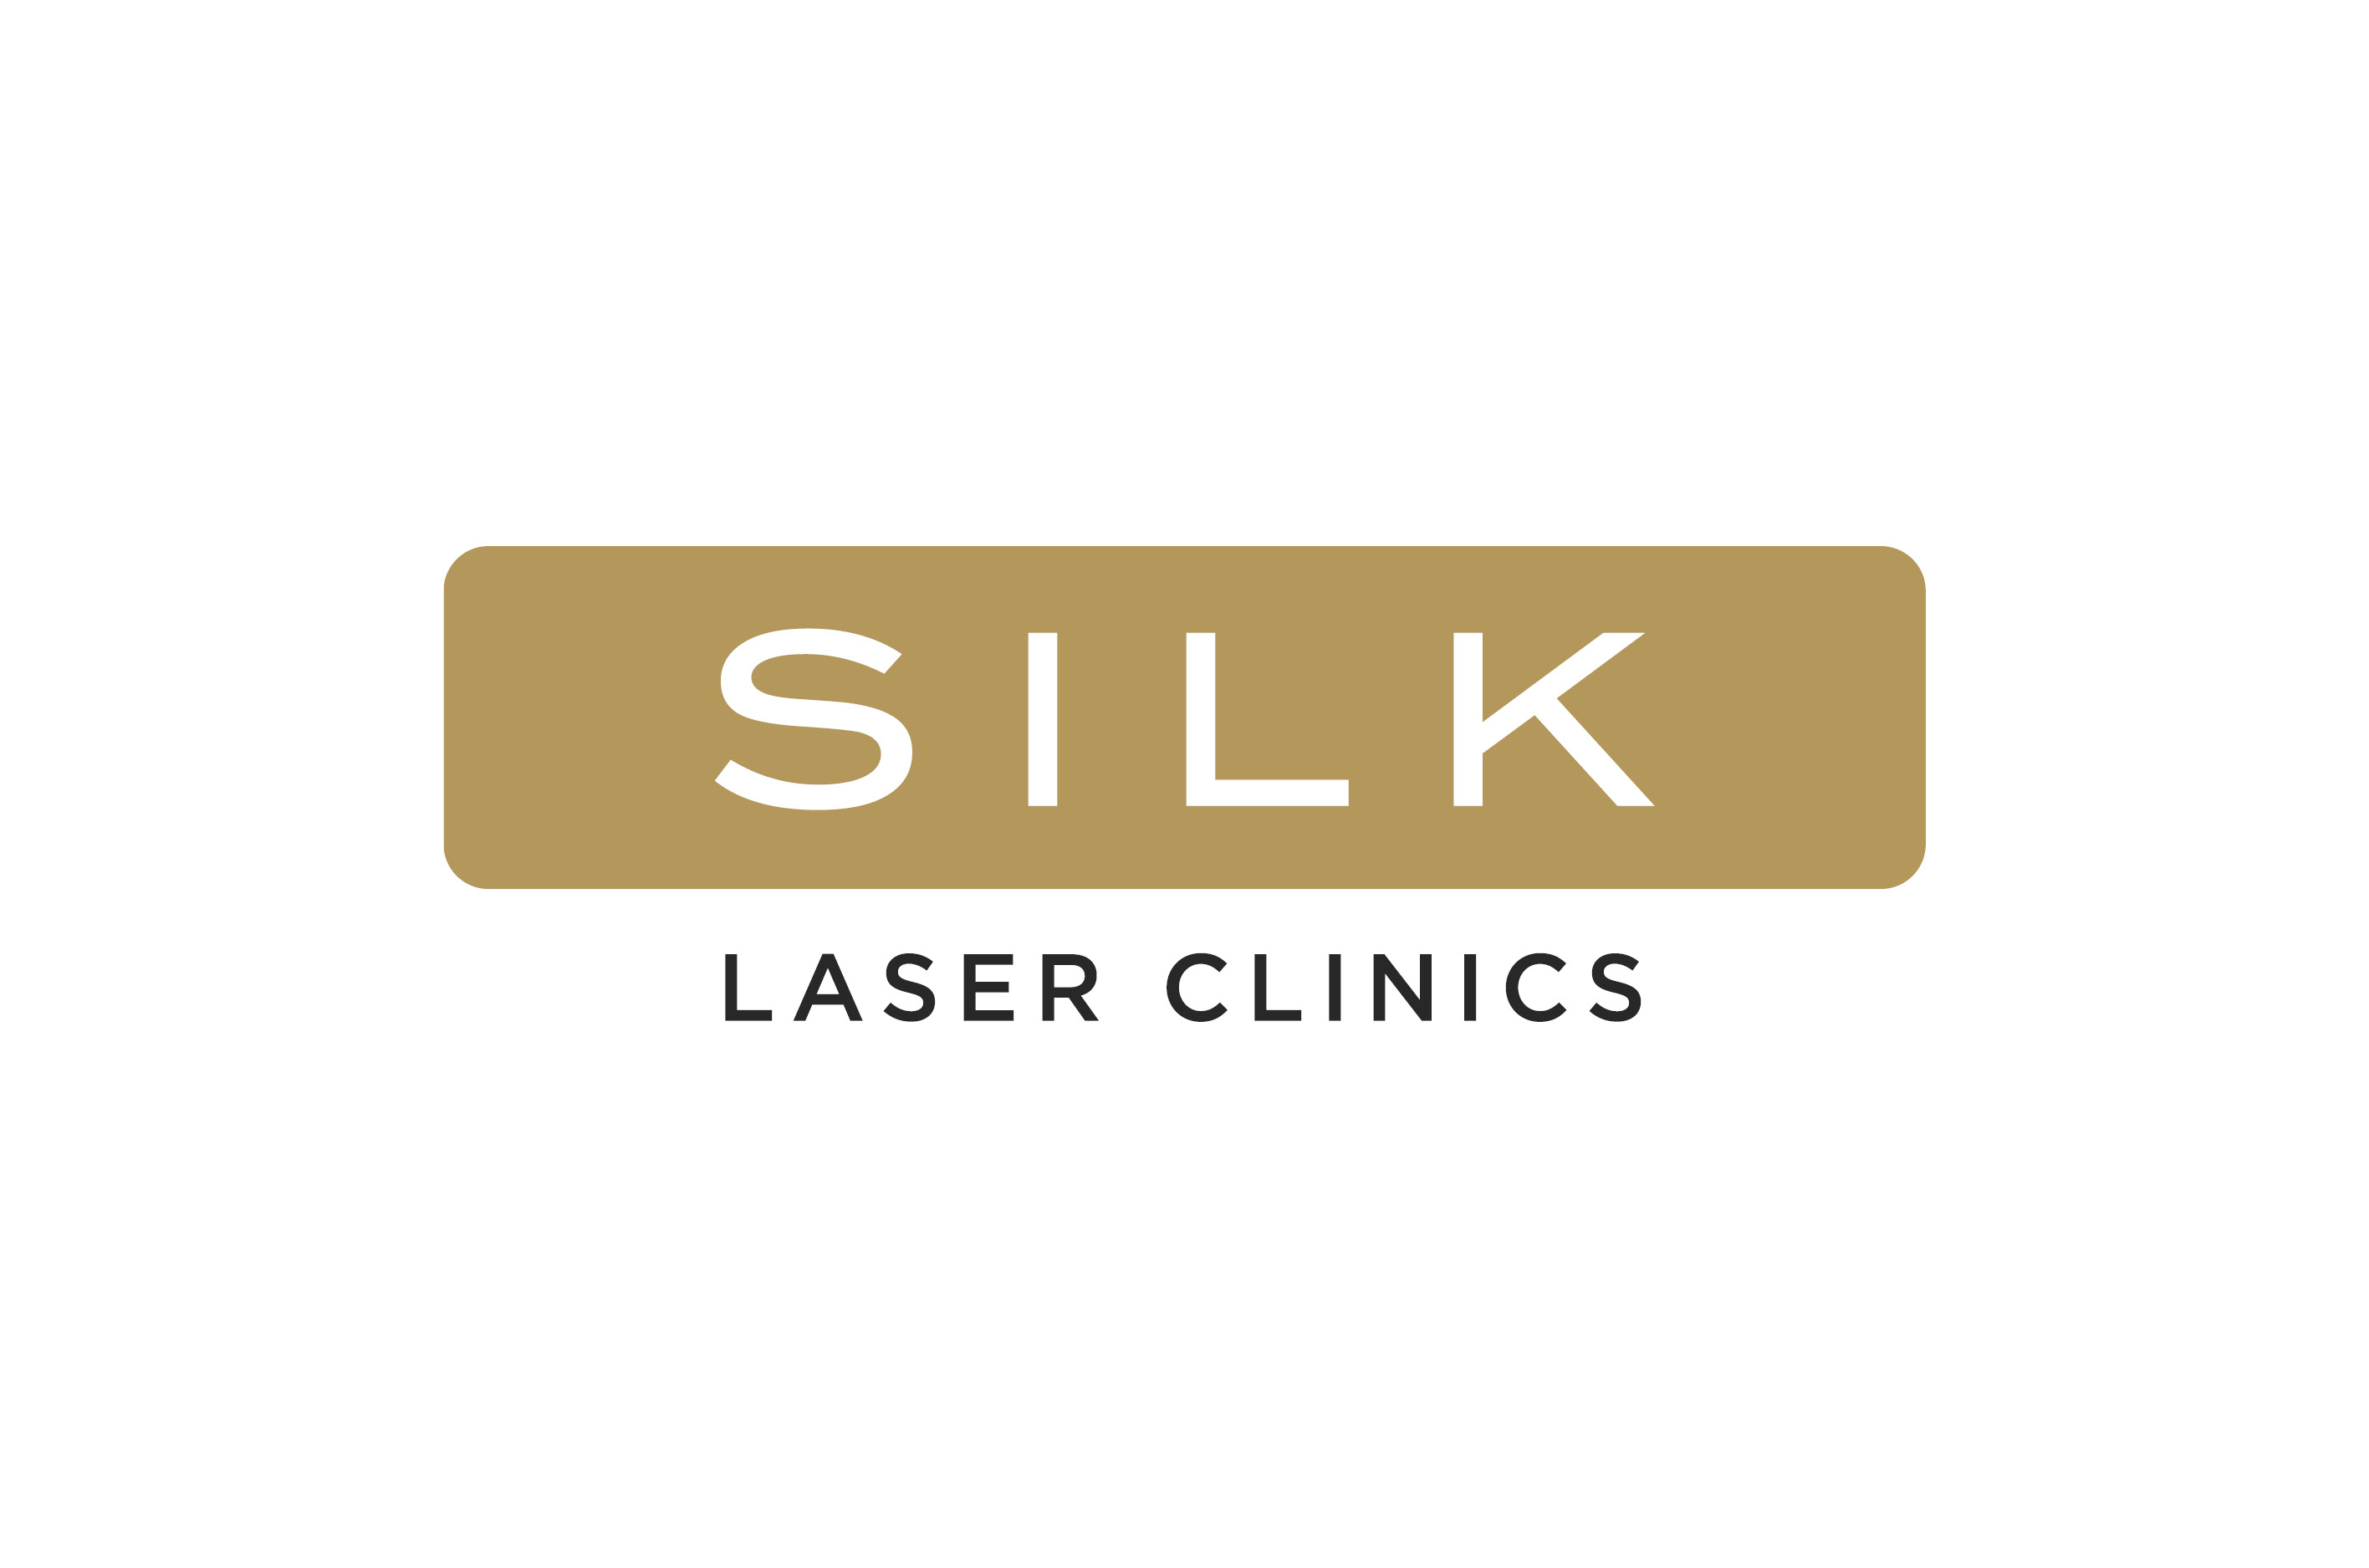 Coorparoo Square Shopping Silk Lasers Clinics